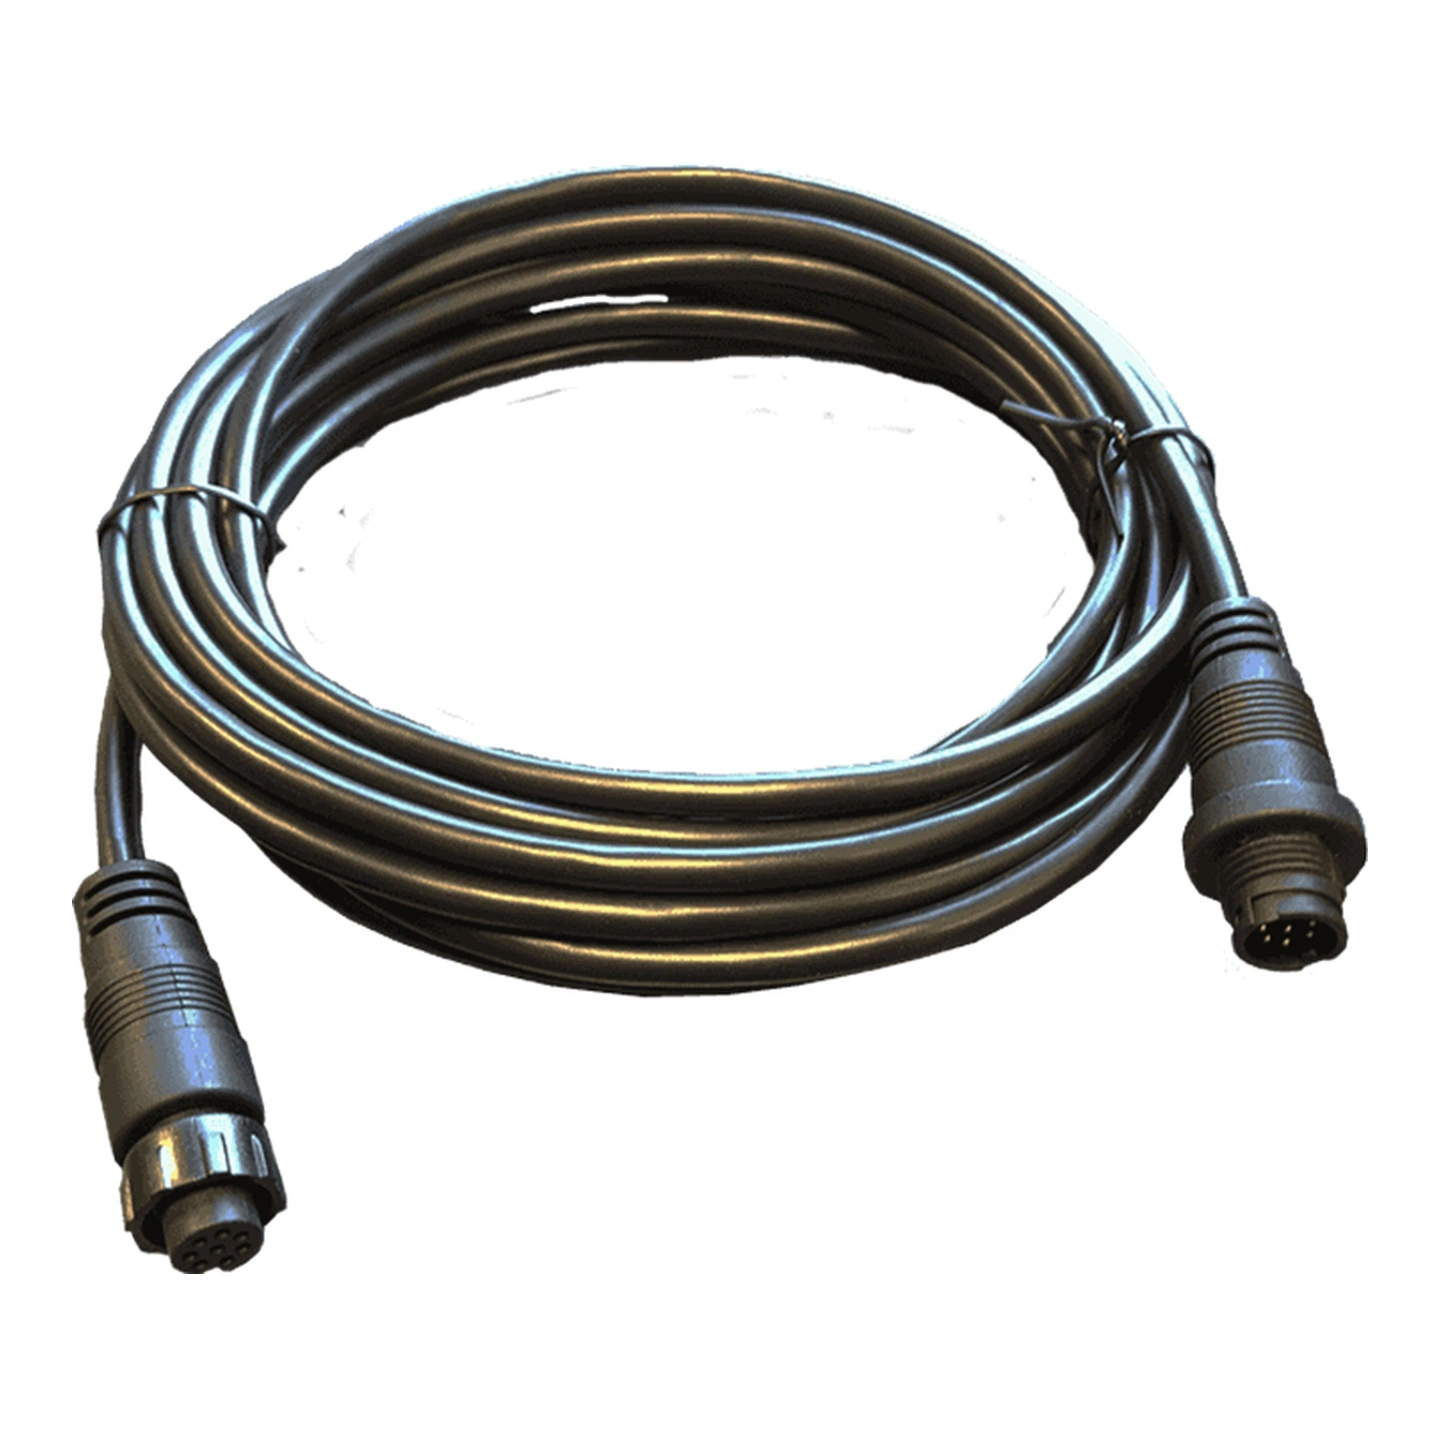 NAVICO VHF,FIST MIC EXT CABLE,5M